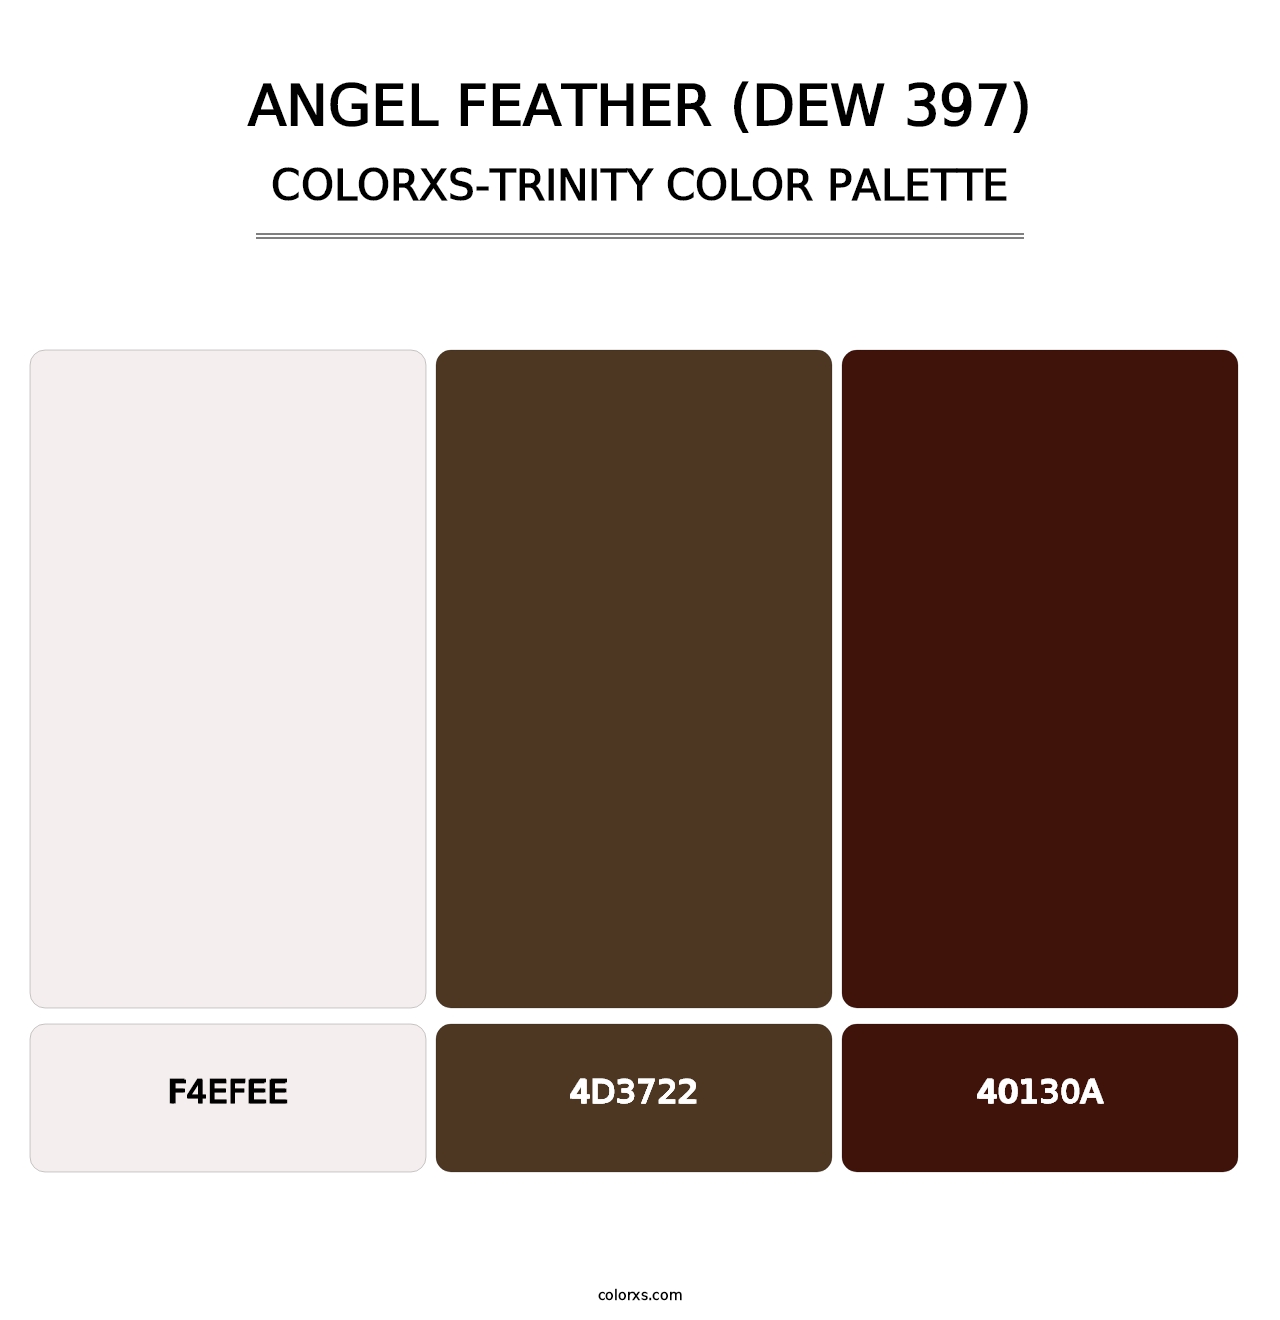 Angel Feather (DEW 397) - Colorxs Trinity Palette